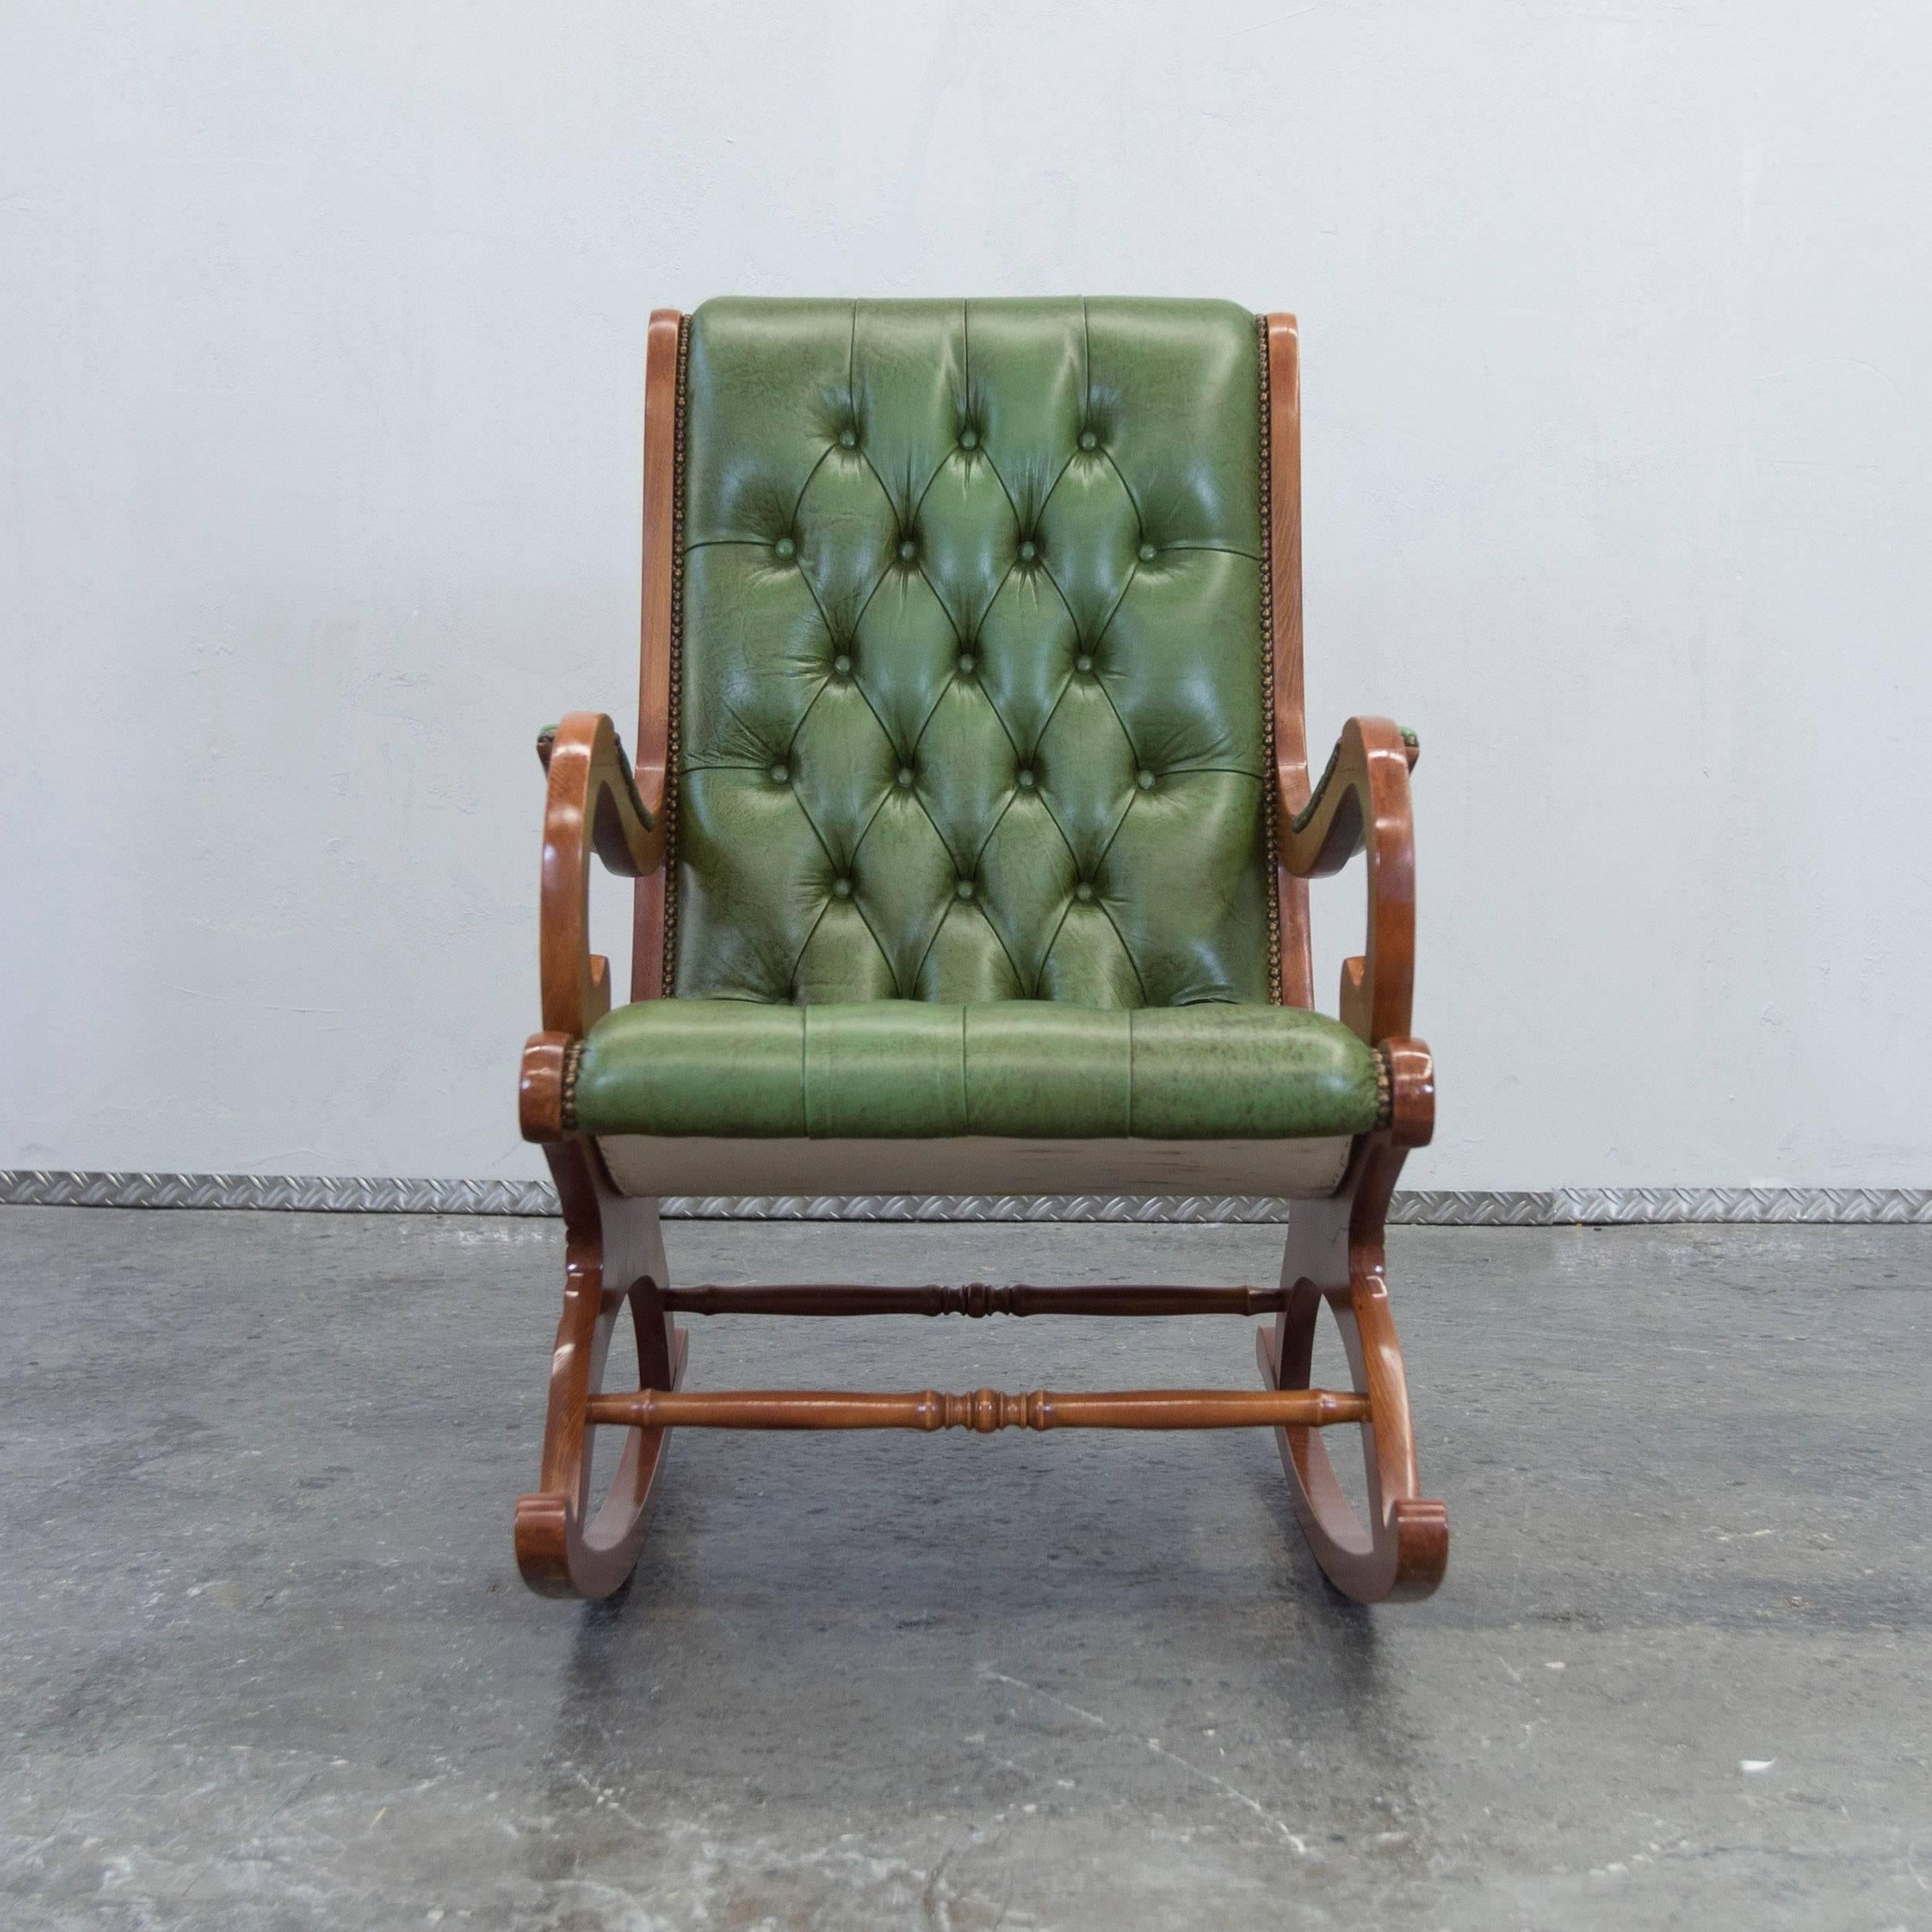 Vintage Chesterfield rocking chair in green leather.